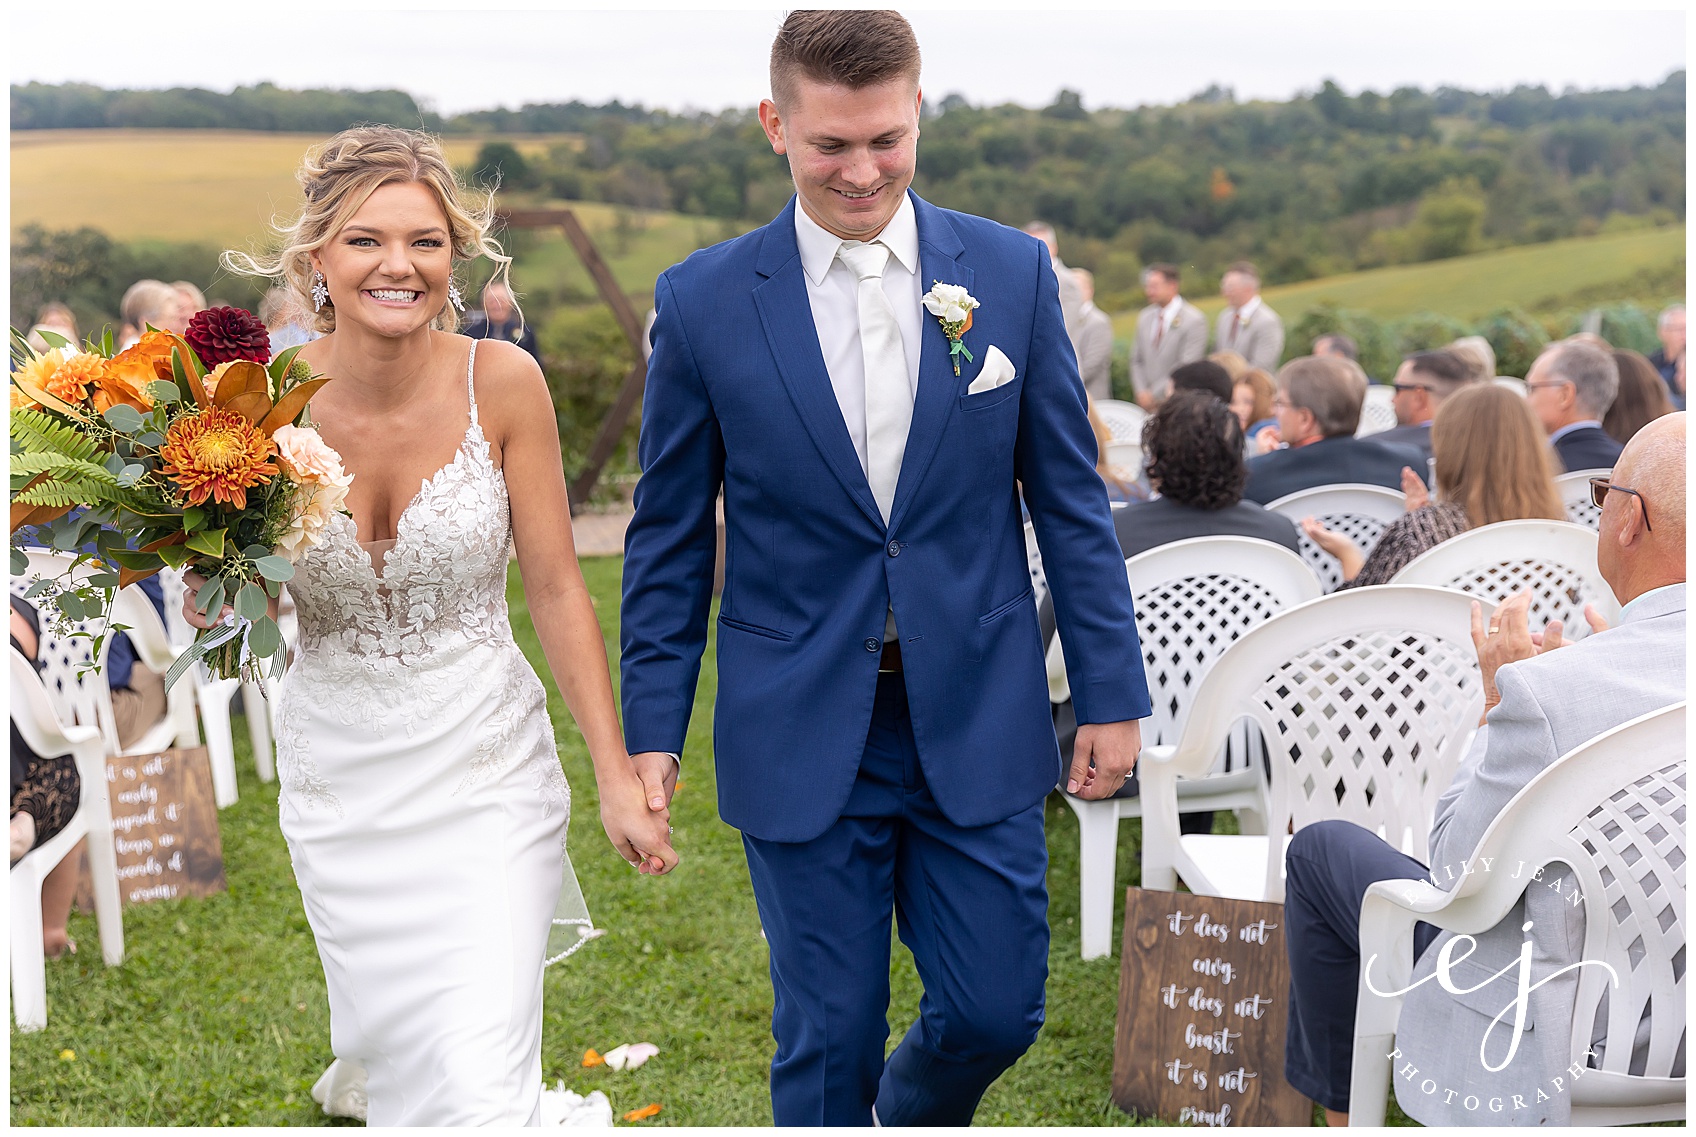 happiness on bride and groom faces as they walk back down the aisle